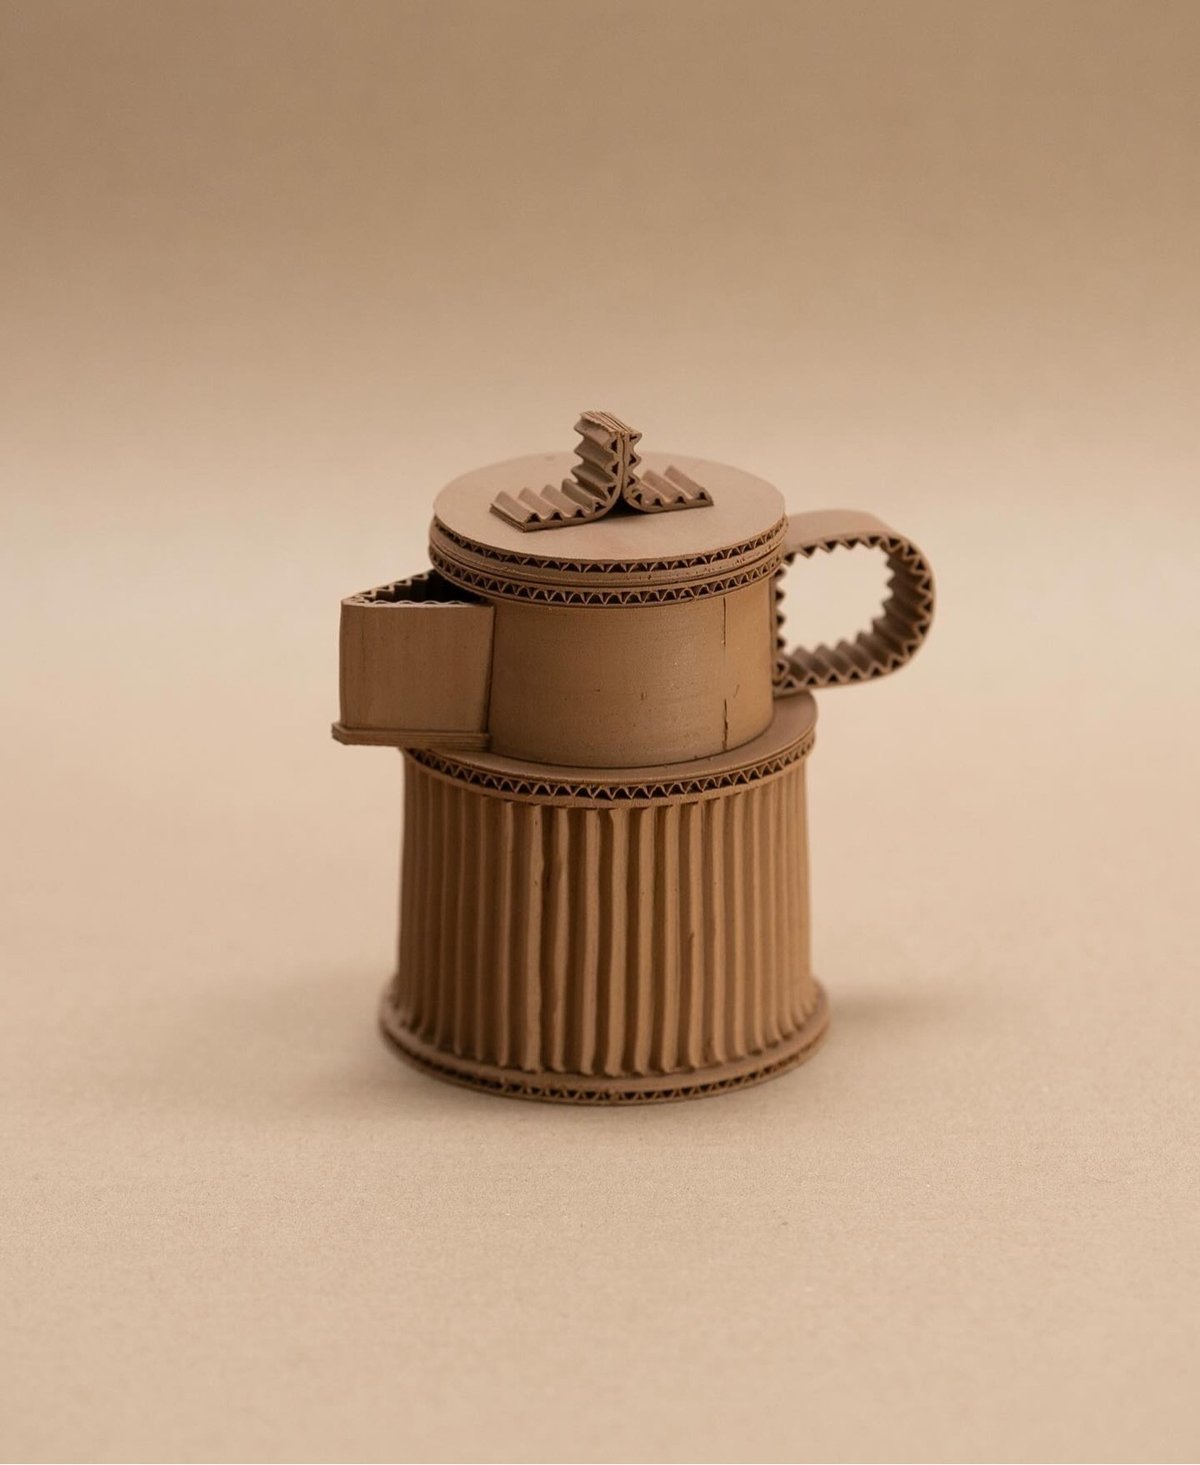 ceramic teapot that looks like it's made out of cardboard